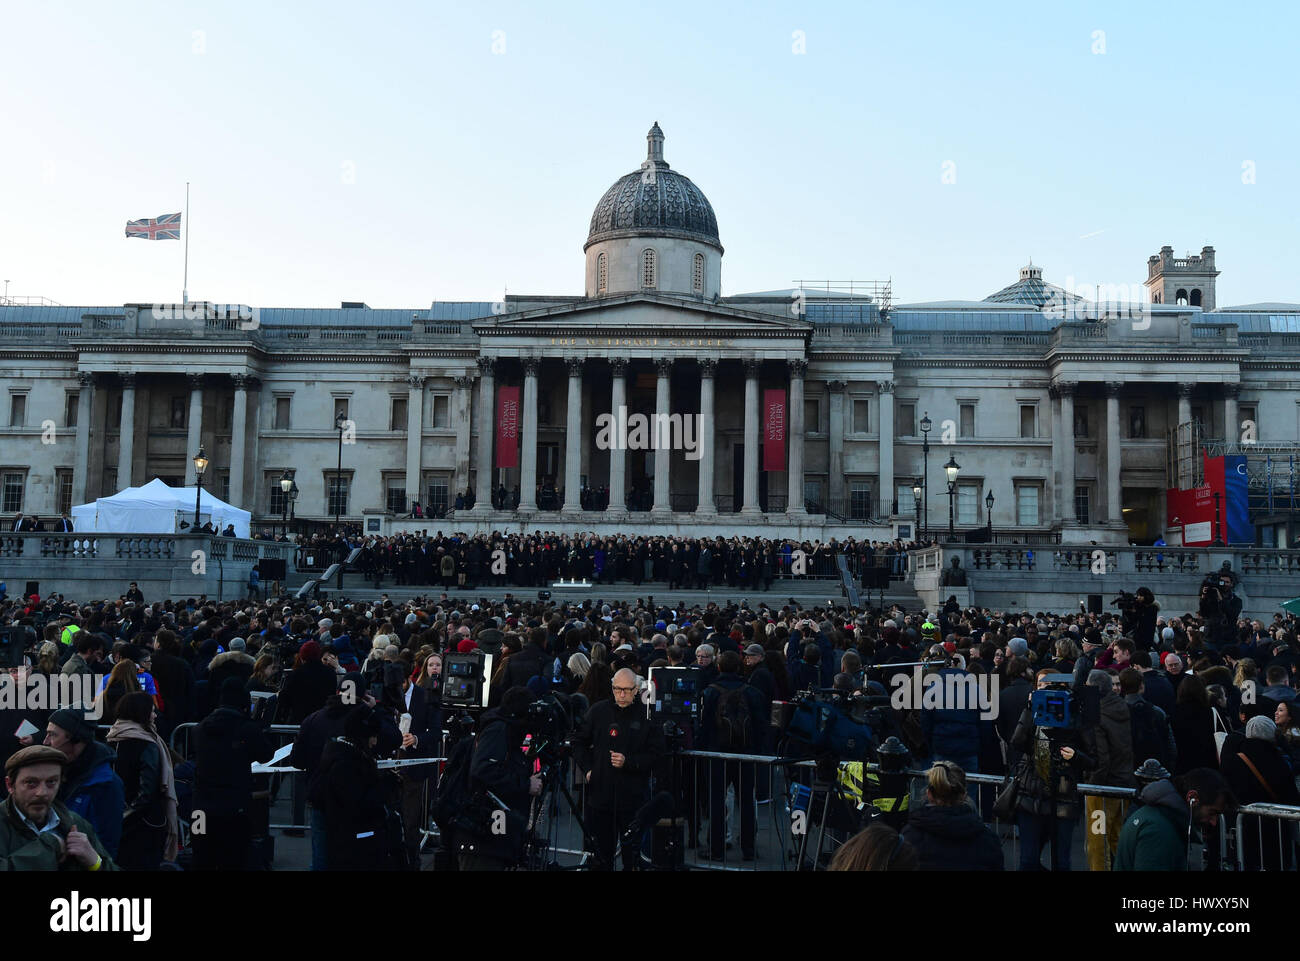 The crowd during the candlelight vigil in Trafalgar Square, London to remember those who lost their lives in the Westminster terrorist attack. Stock Photo